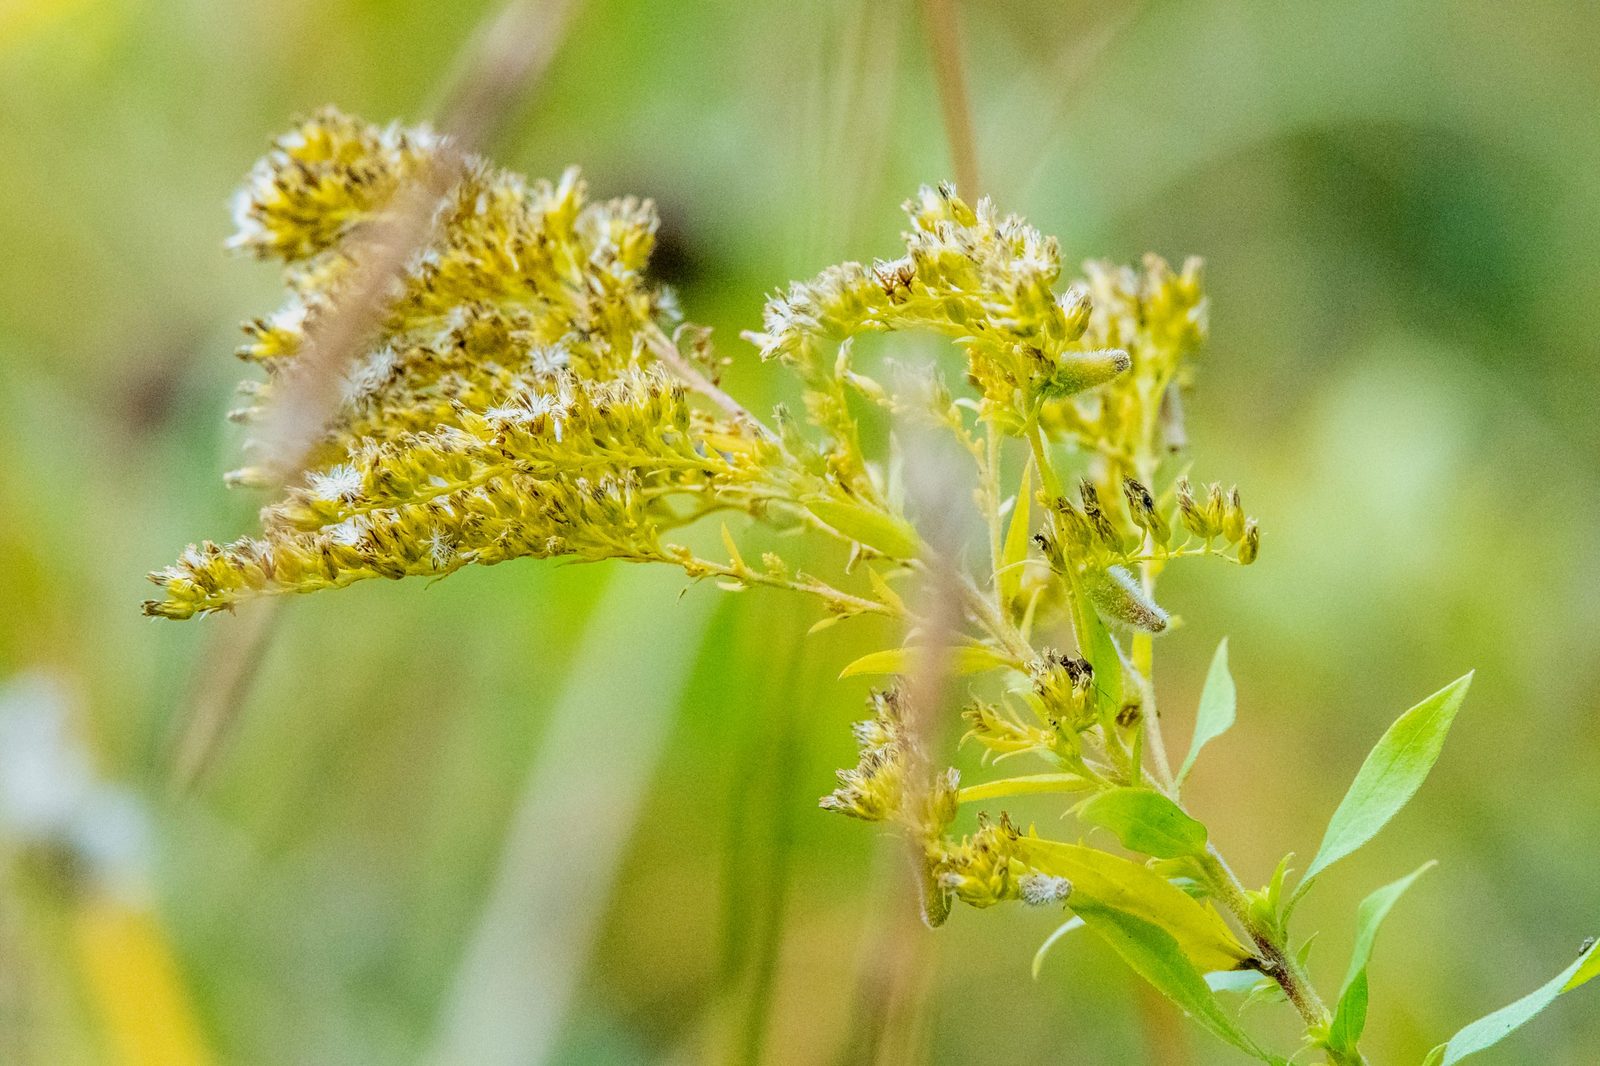 Close-up of a prarie plant with white fuzzy flowers.